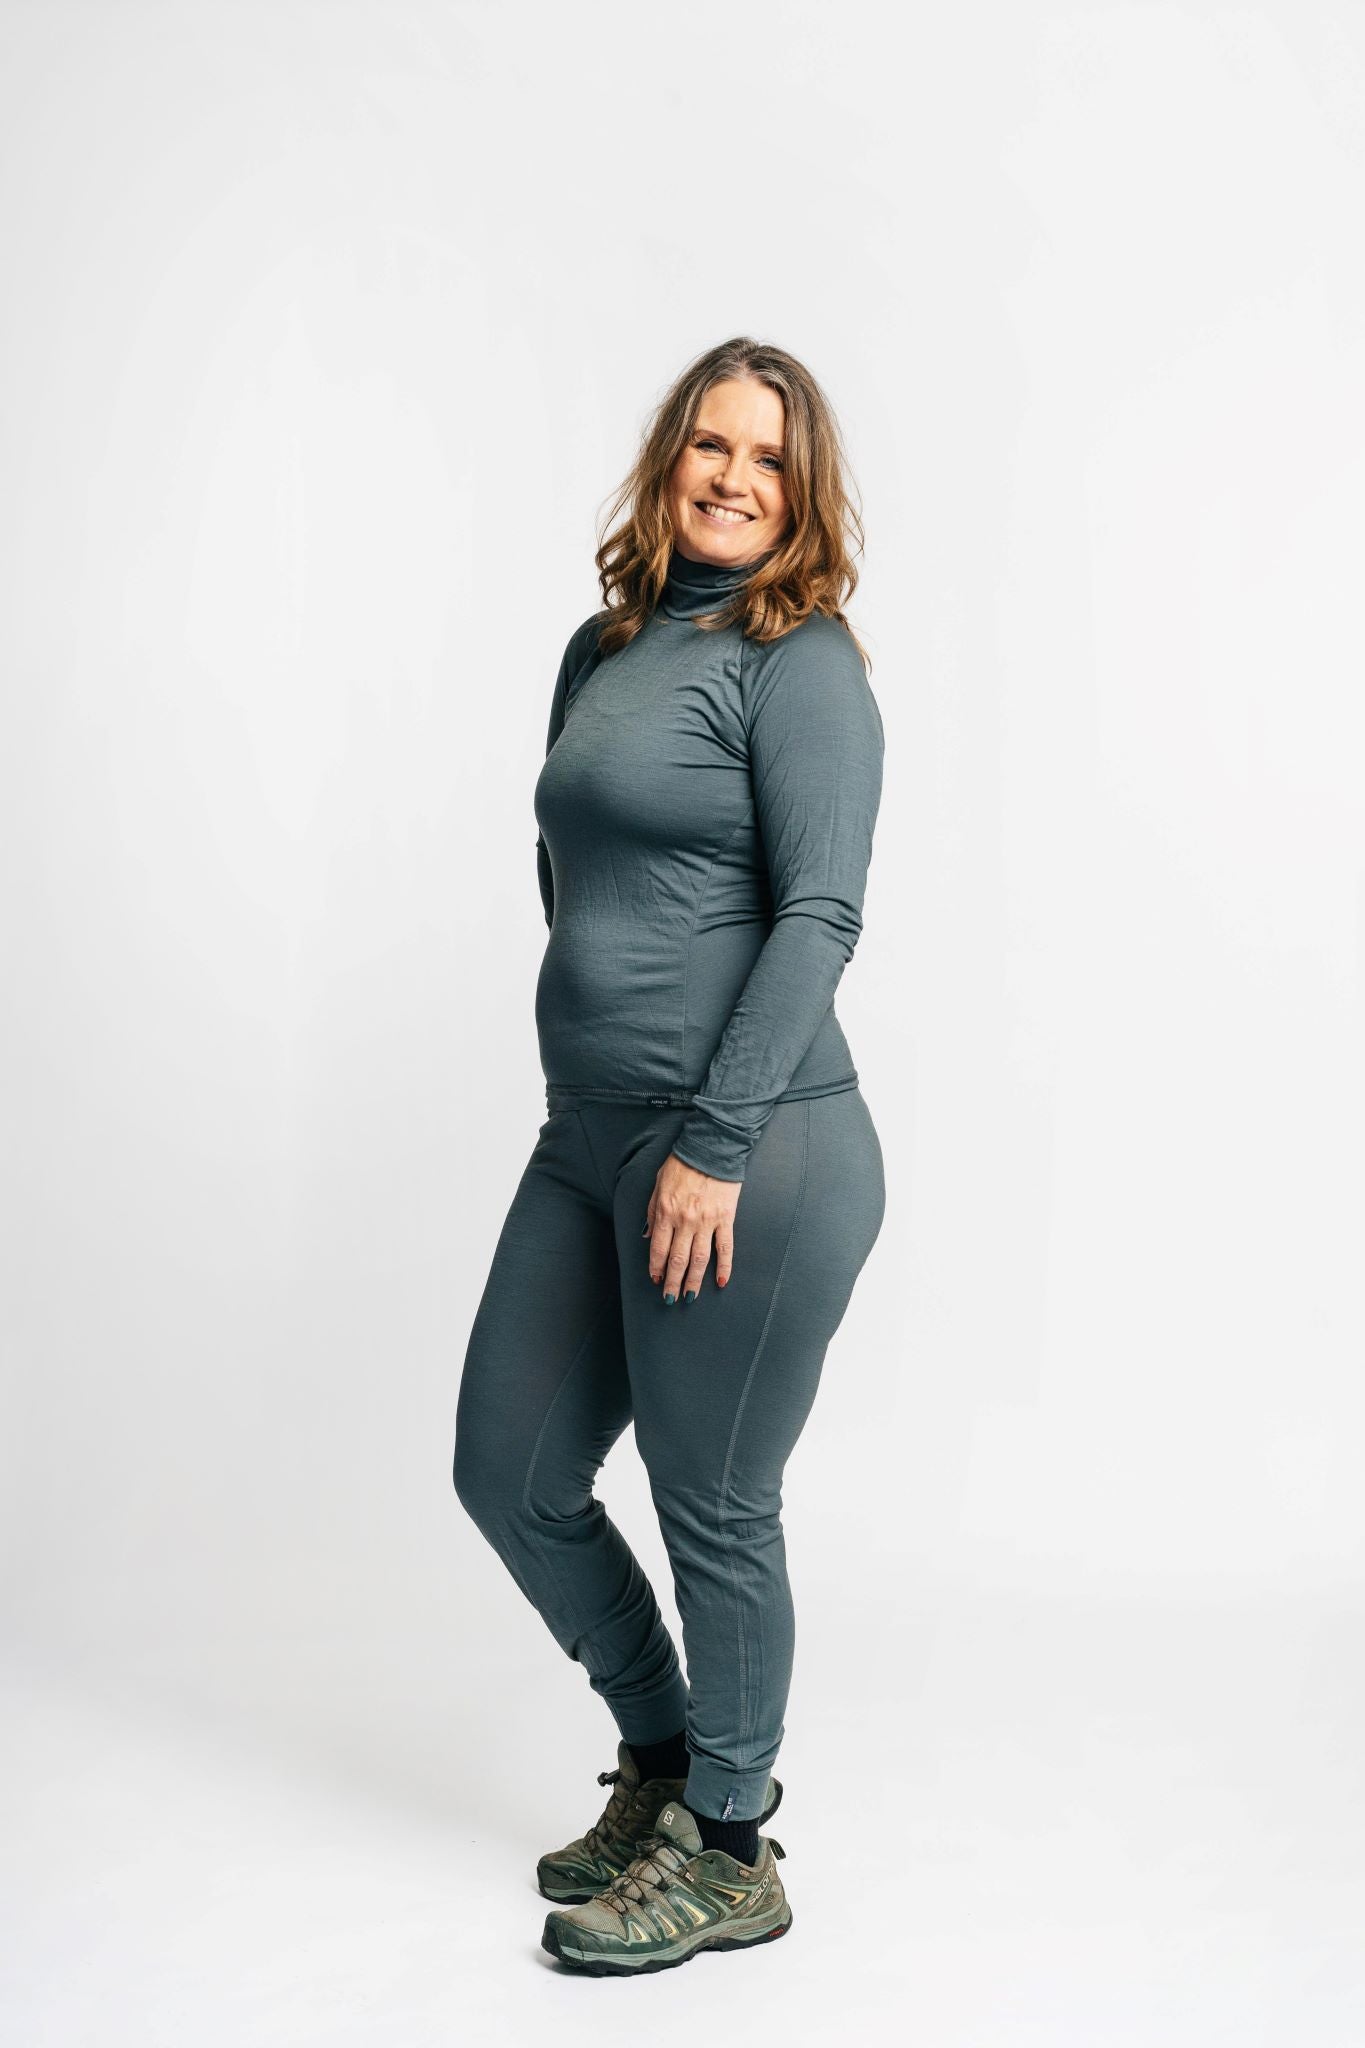 alpine fit merino wool base layer top and bottom on model side view